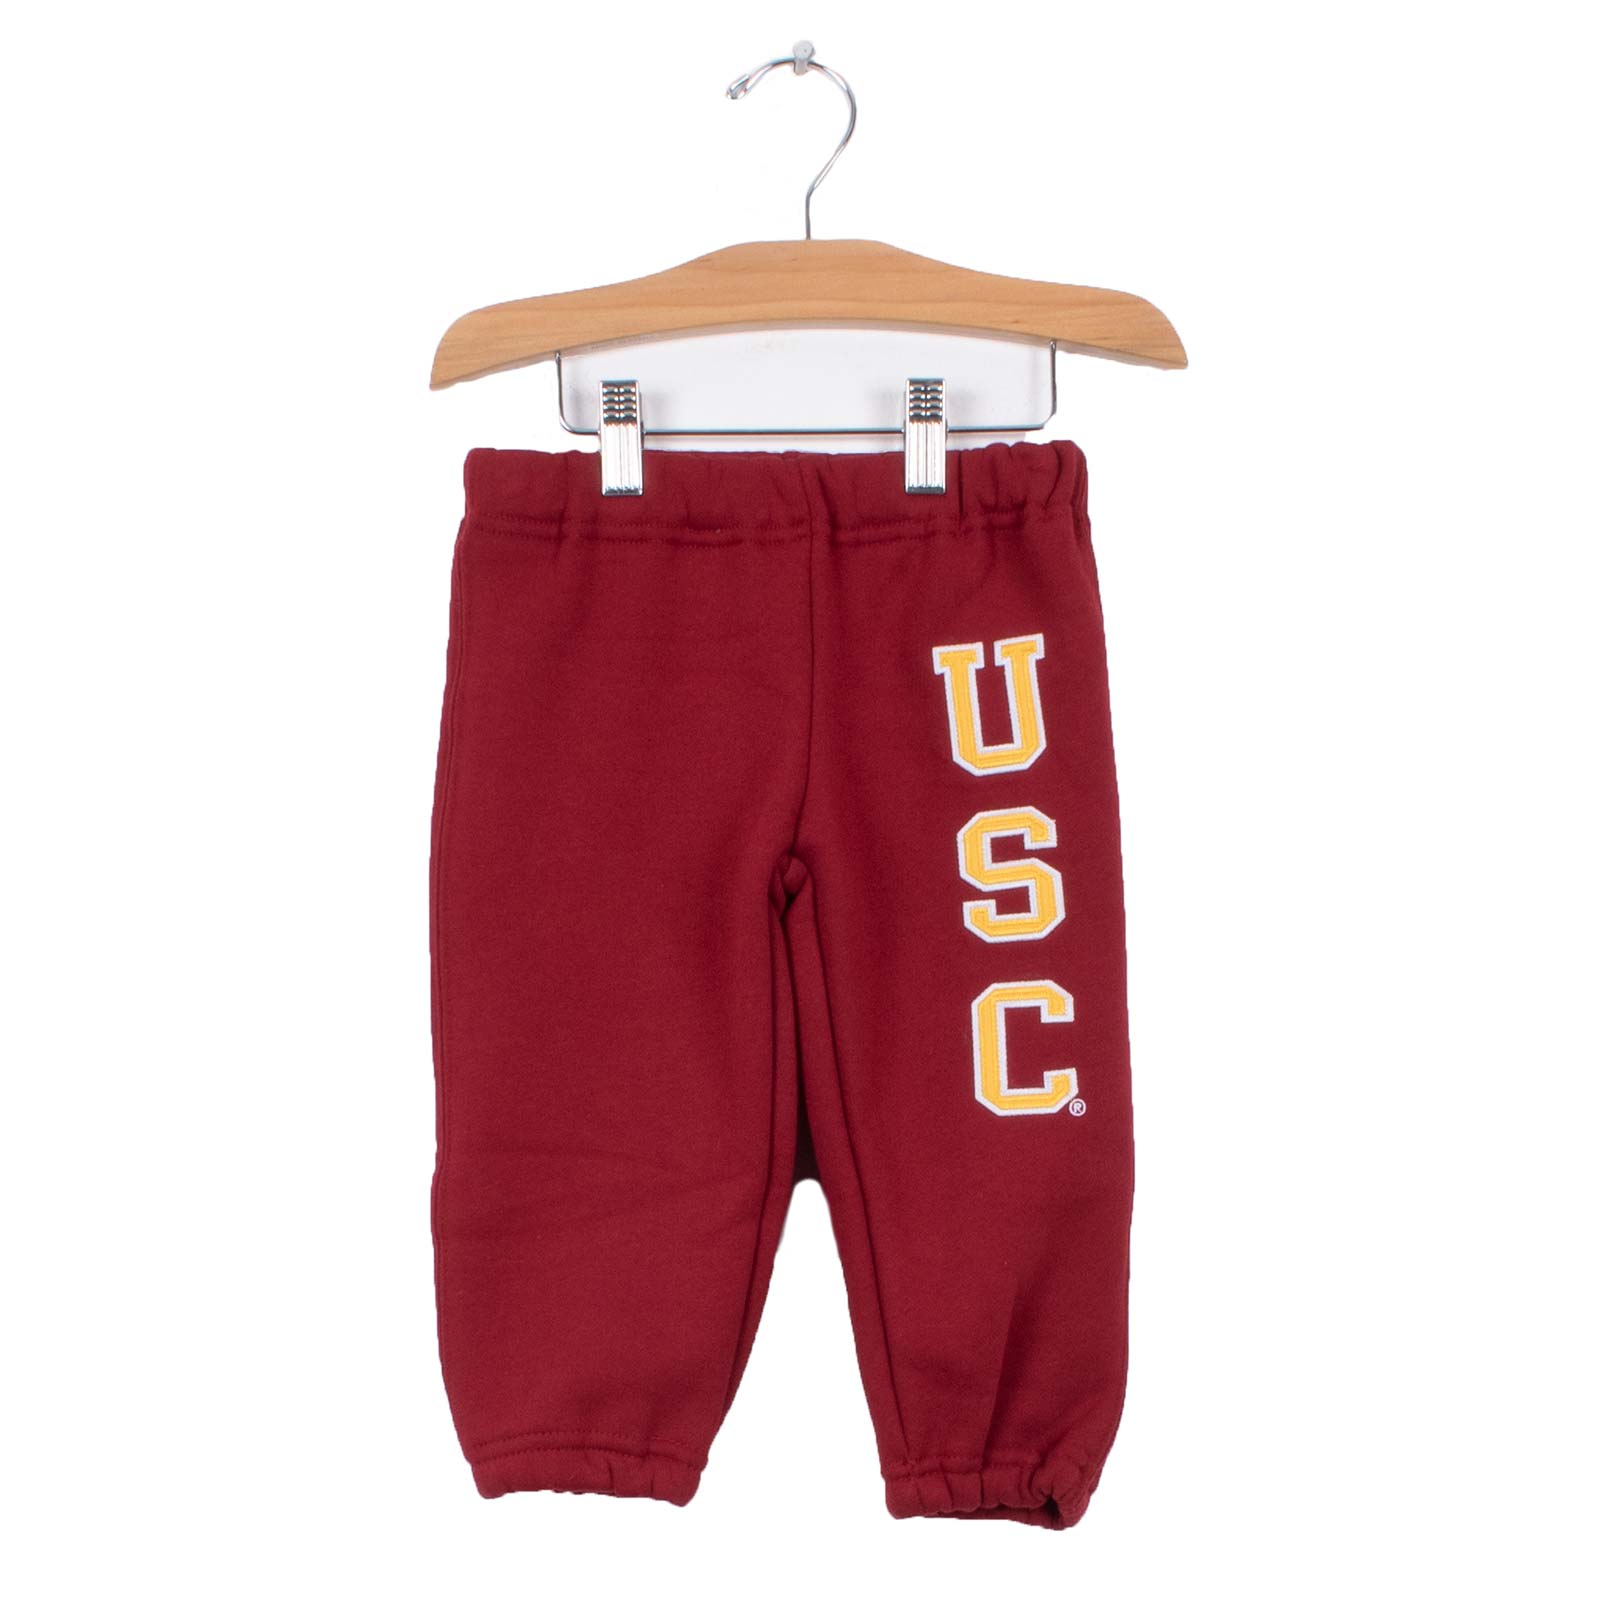 USC Arch Toddler TT Pant Oxford image01